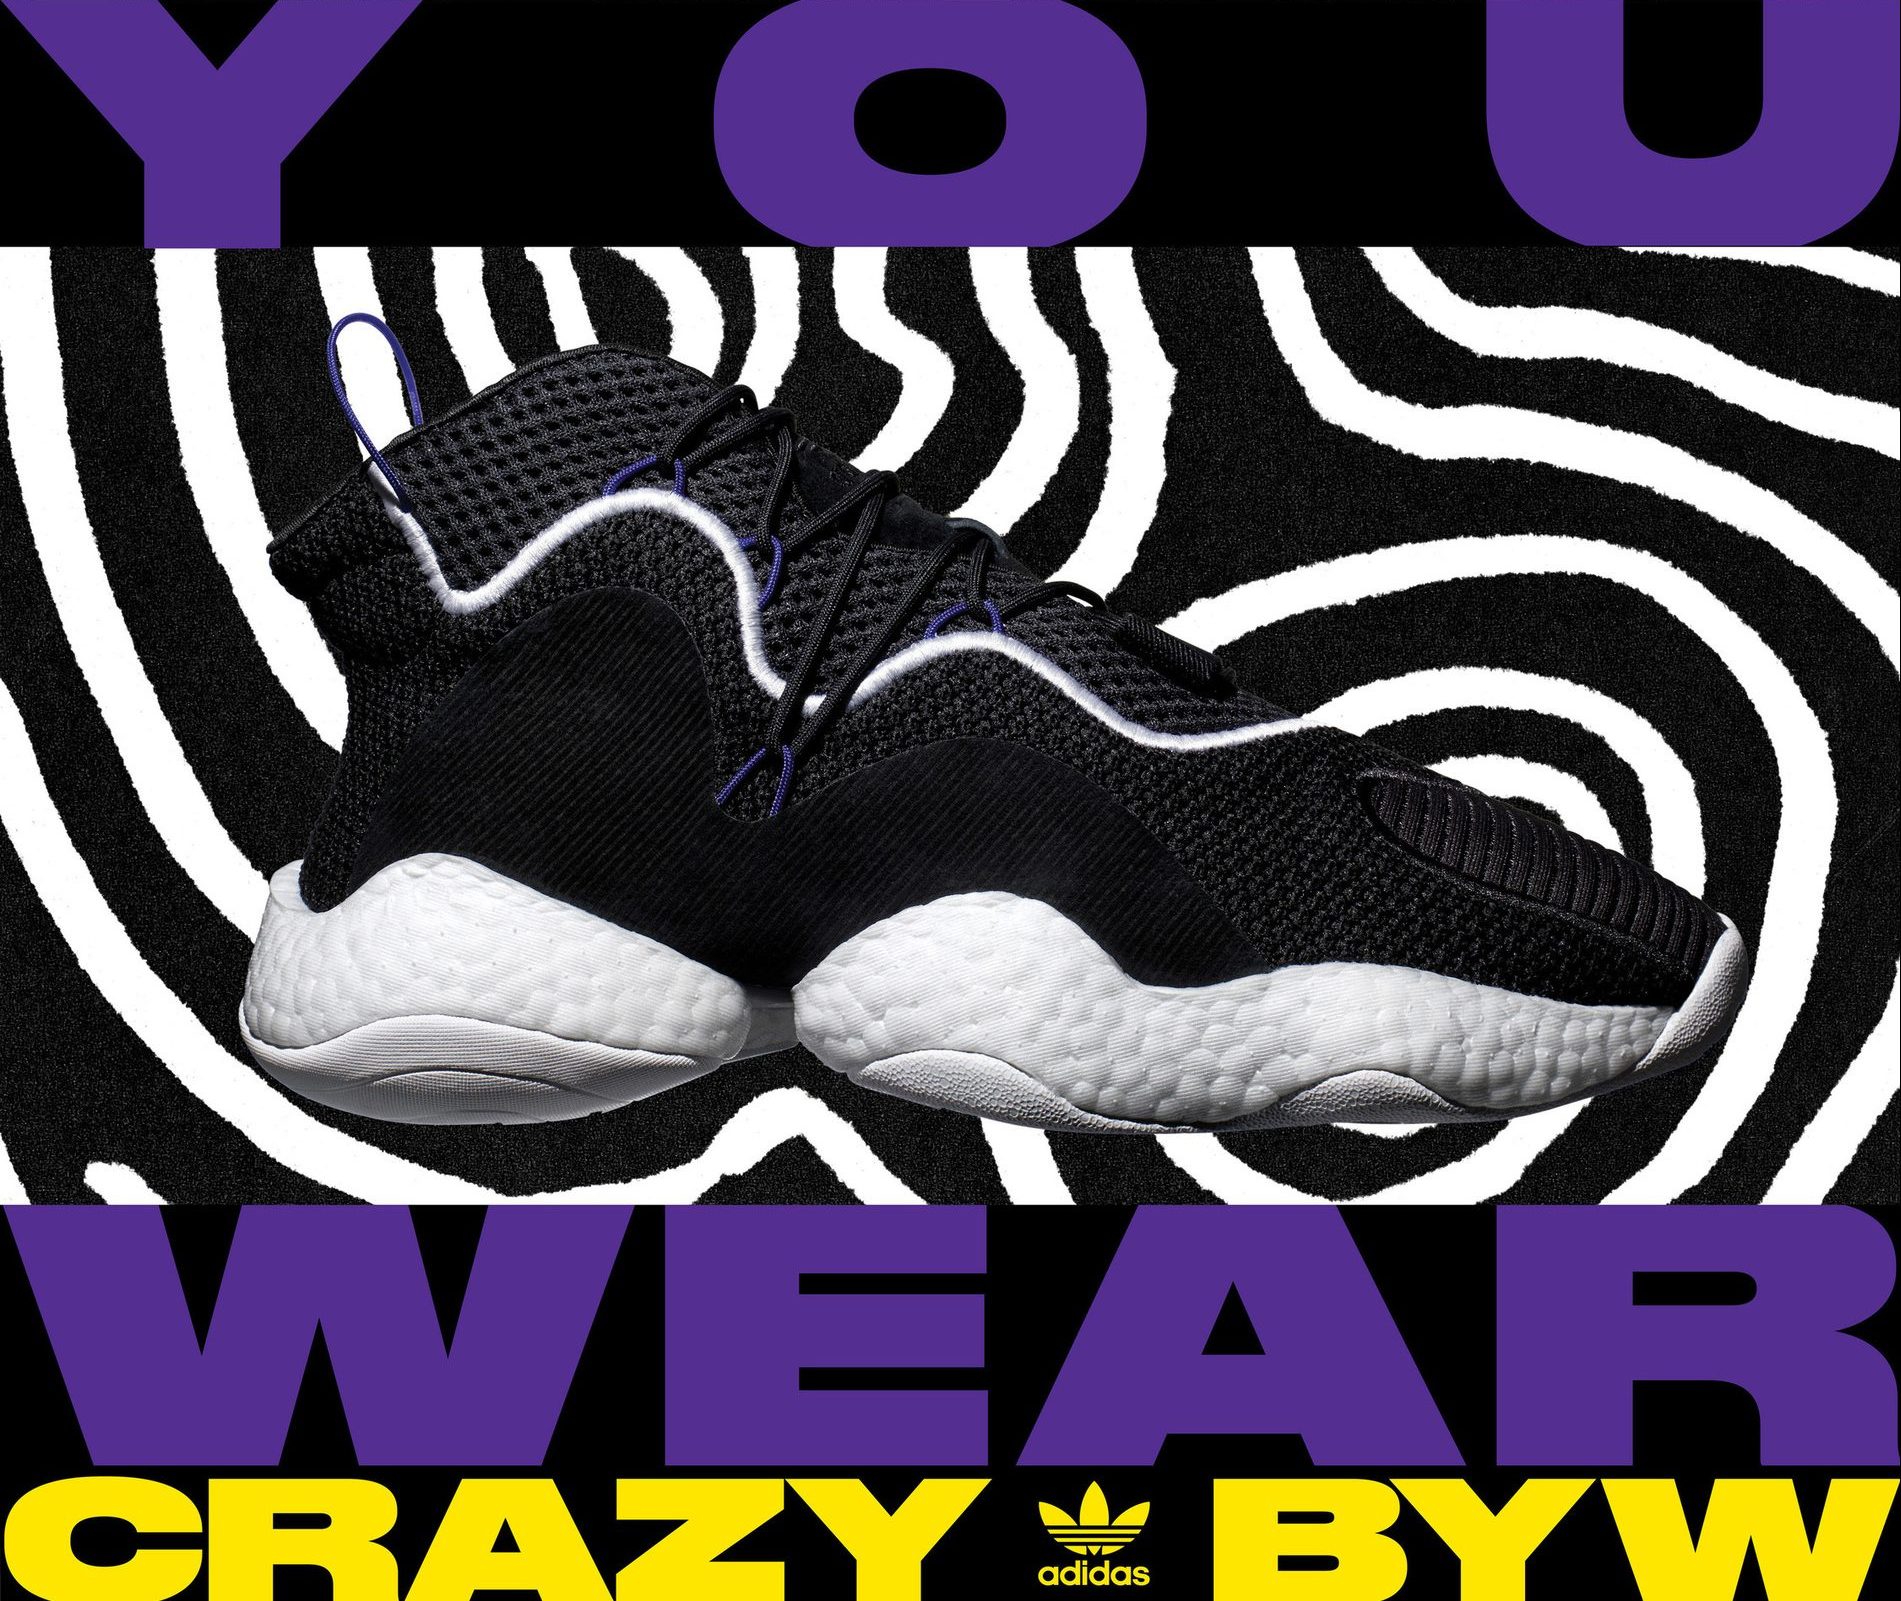 byw meaning adidas